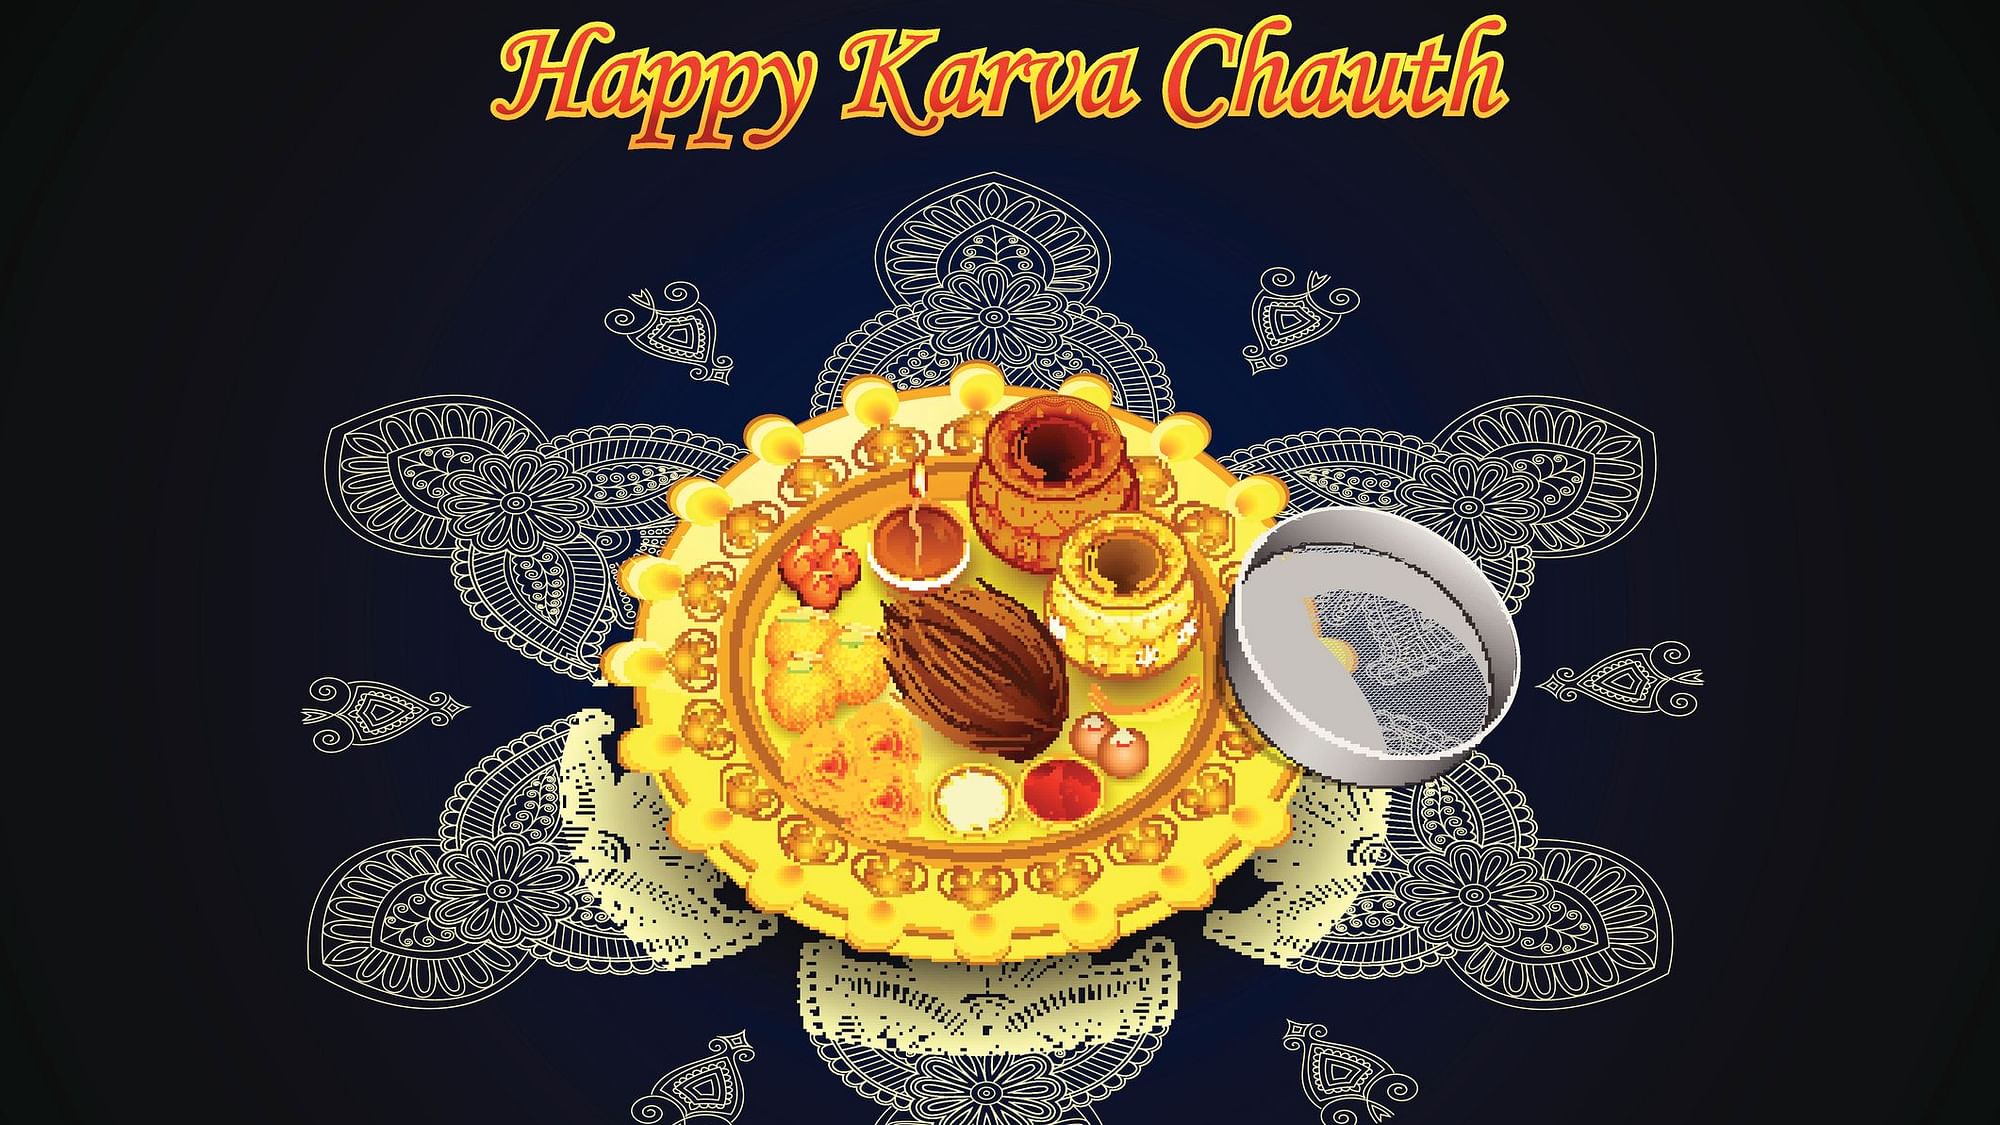 Happy Karwa Chauth 2020 wishes for husbands and wives.